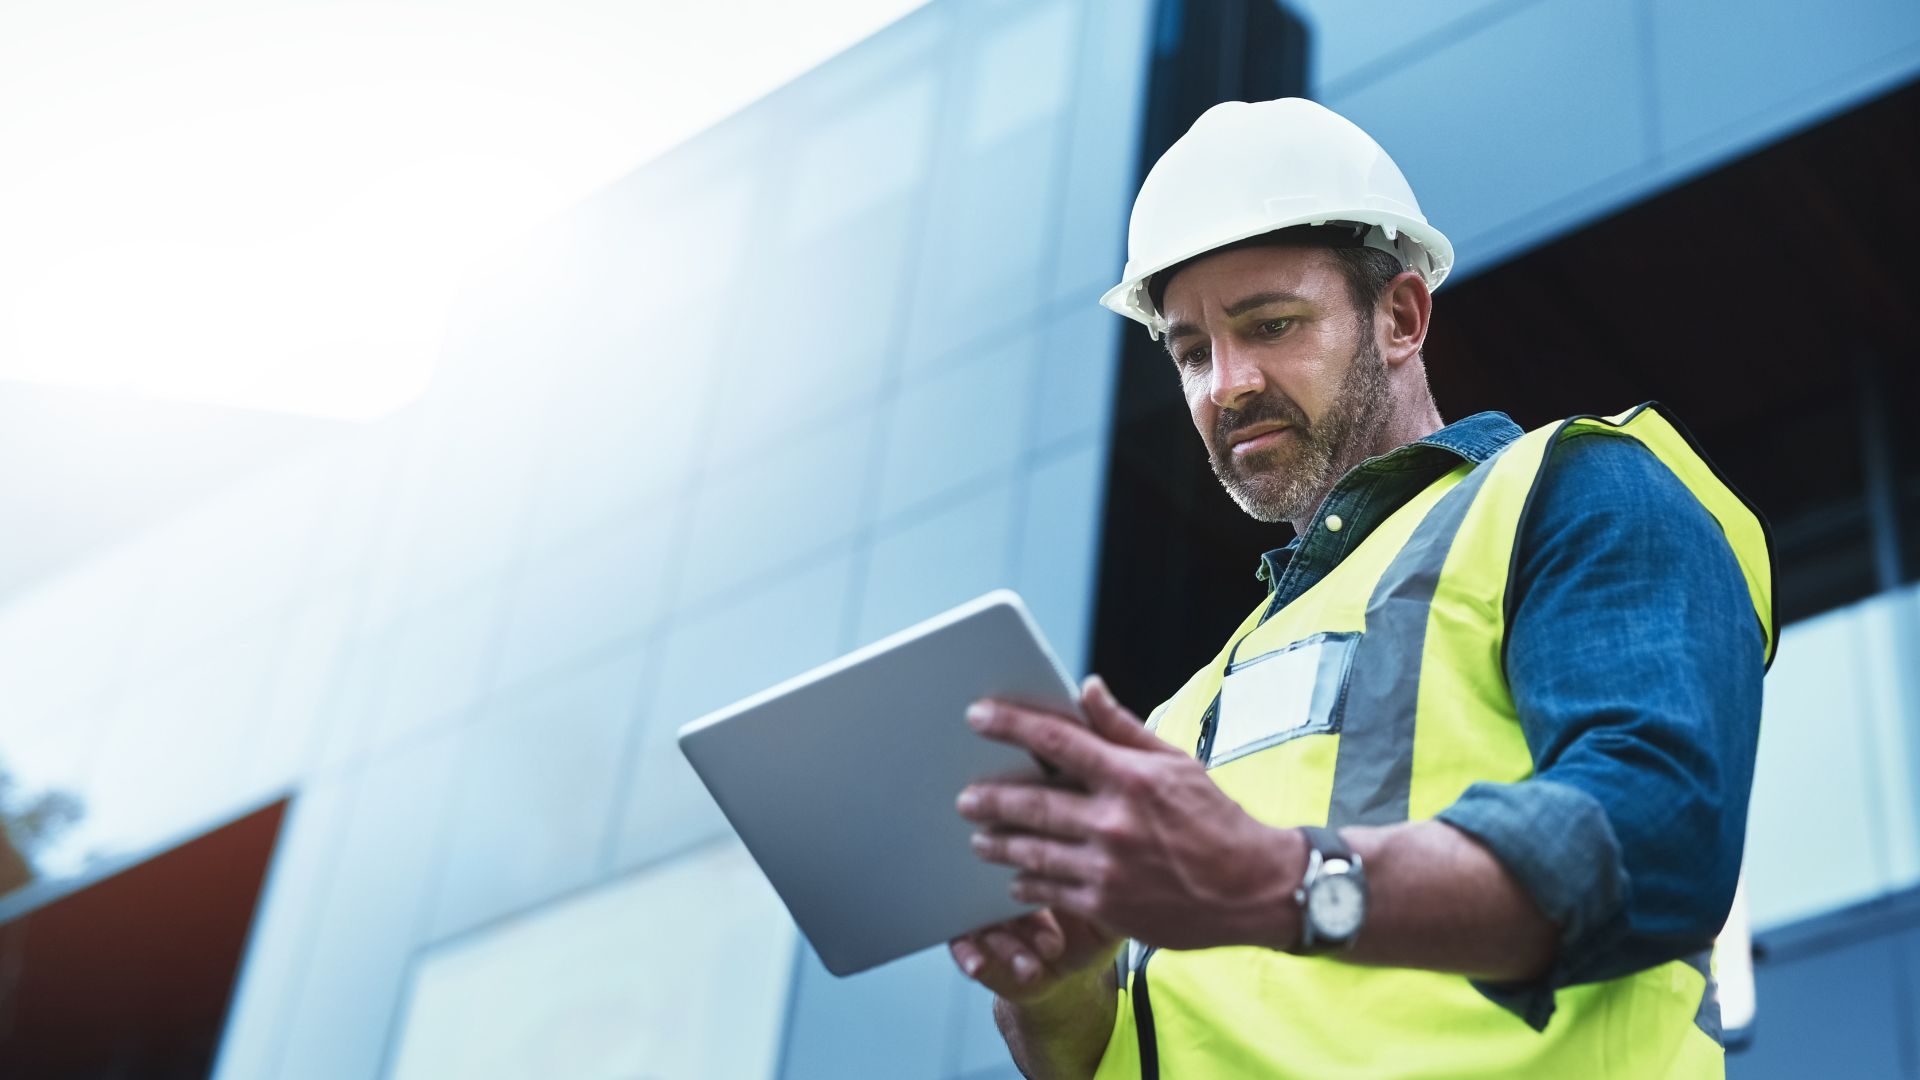 From Chaos to Cohesion: Simplifying Subcontractor Operations with Construction Scheduling Software